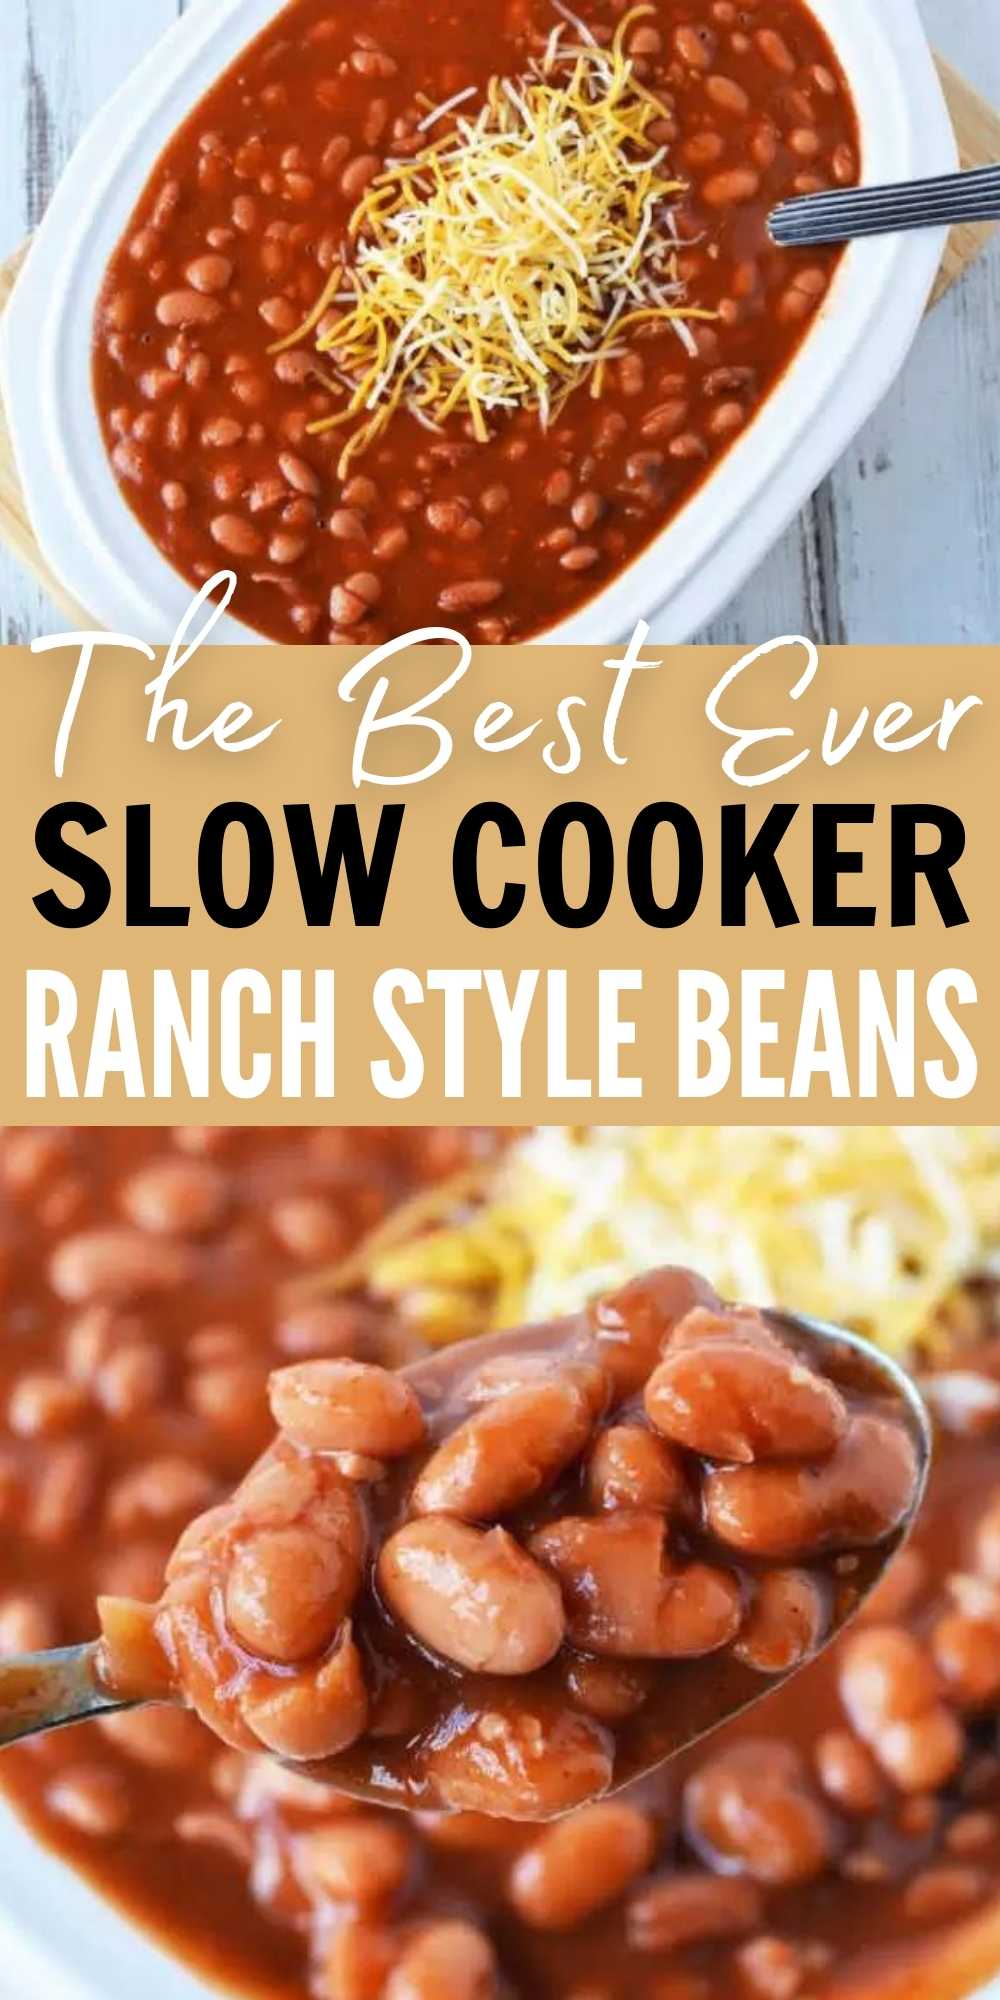 Everyone will love  these simple Slow Cooker Ranch Style Beans. The slow cooker does all the work for this delicious and easy side dish recipe. Try Crock pot ranch style beans recipe today!  #eatingonadime #sidedishrecipes #beanrecipes #crockpotrecipes #BBQrecipes 
